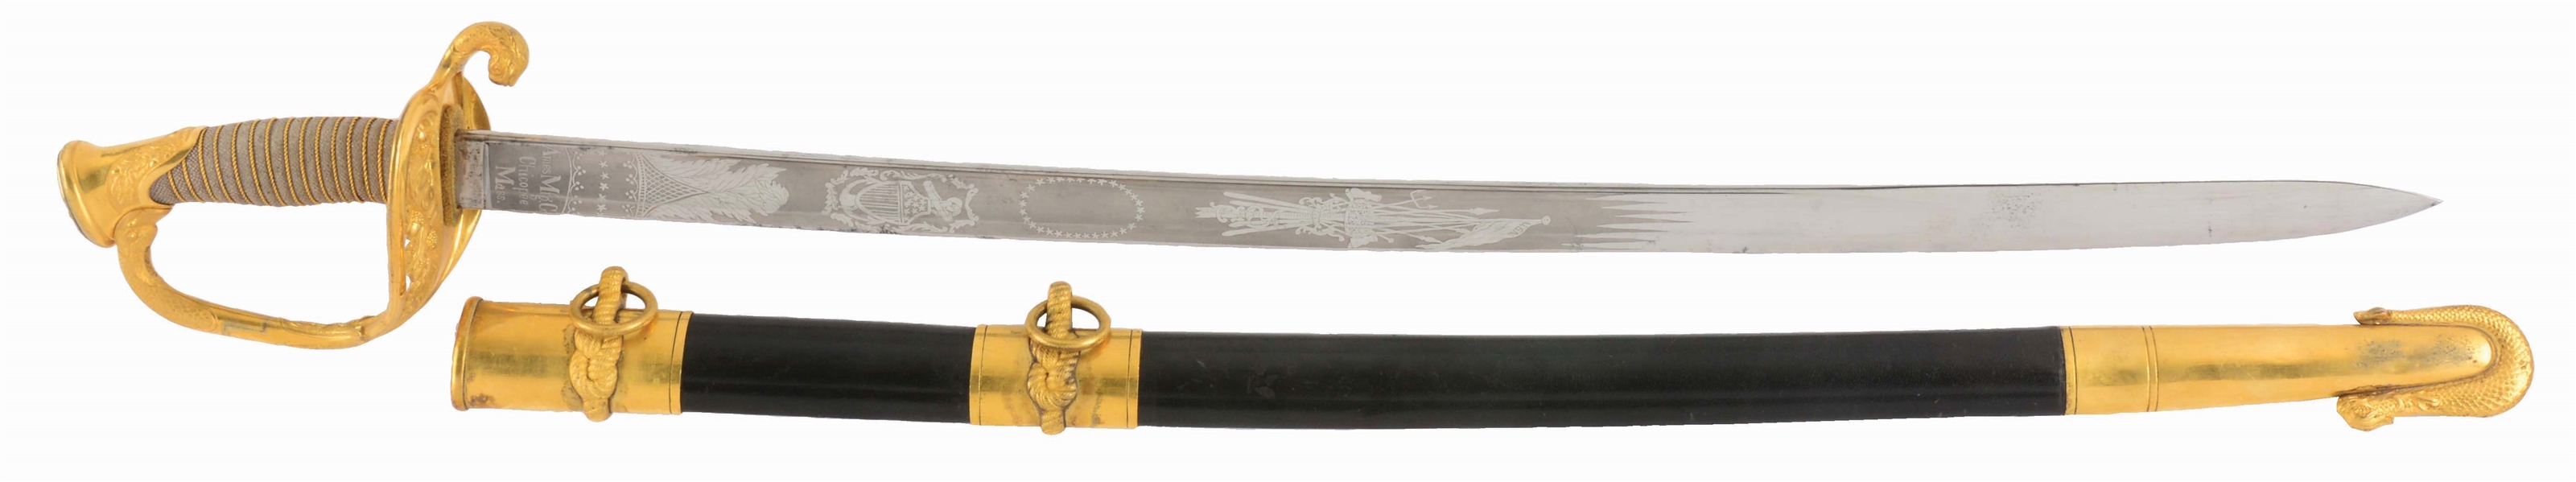 AMES MODEL 1852 NAVAL OFFICERS SWORD WITH SCABBARD.